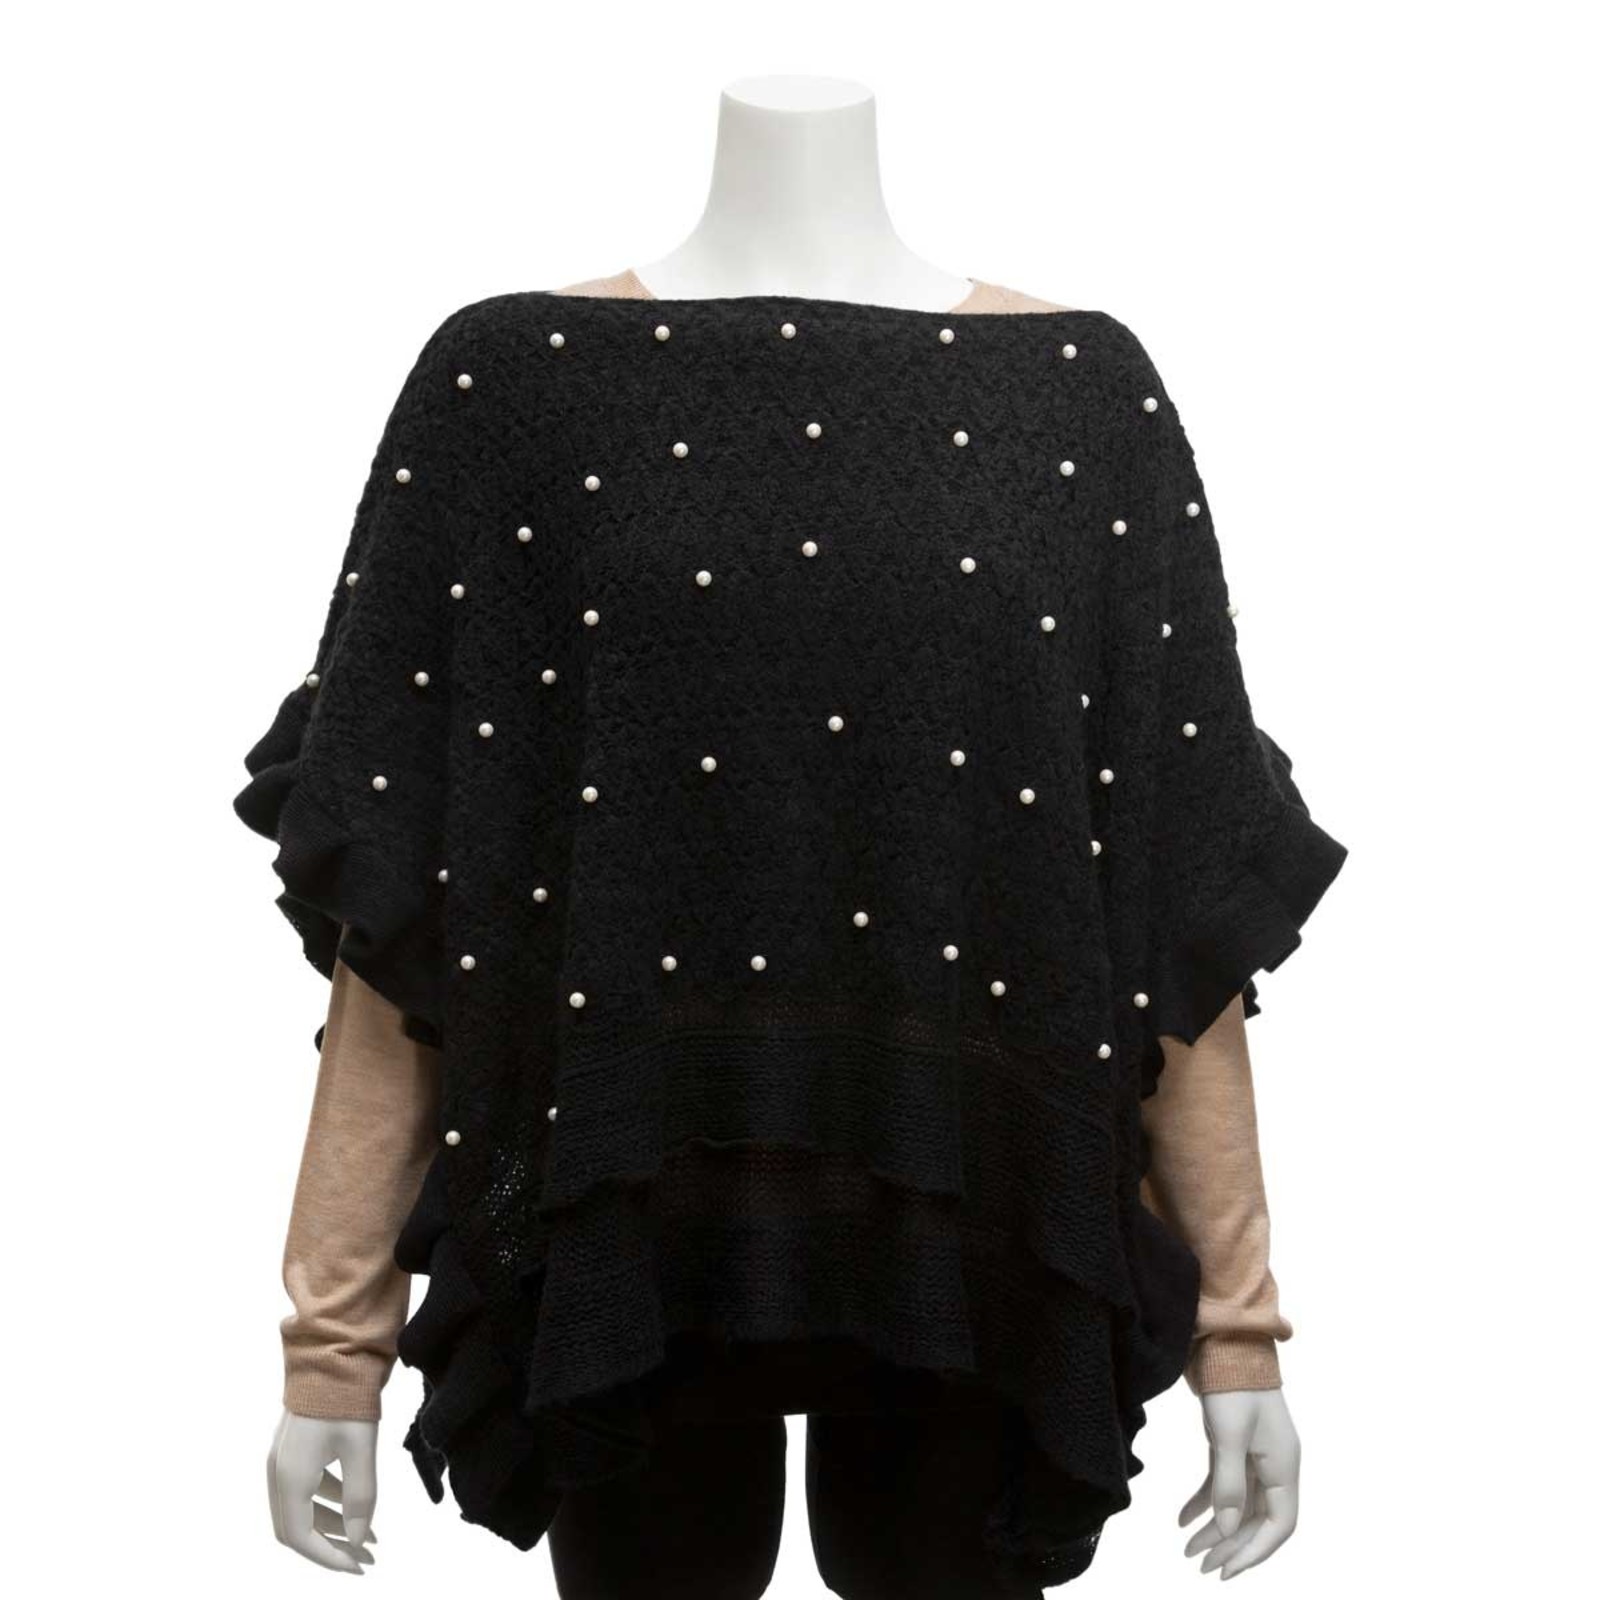 Trezo BLACK KNIT PONCHO WITH PEARLS 20"X40"  S6134 loading=